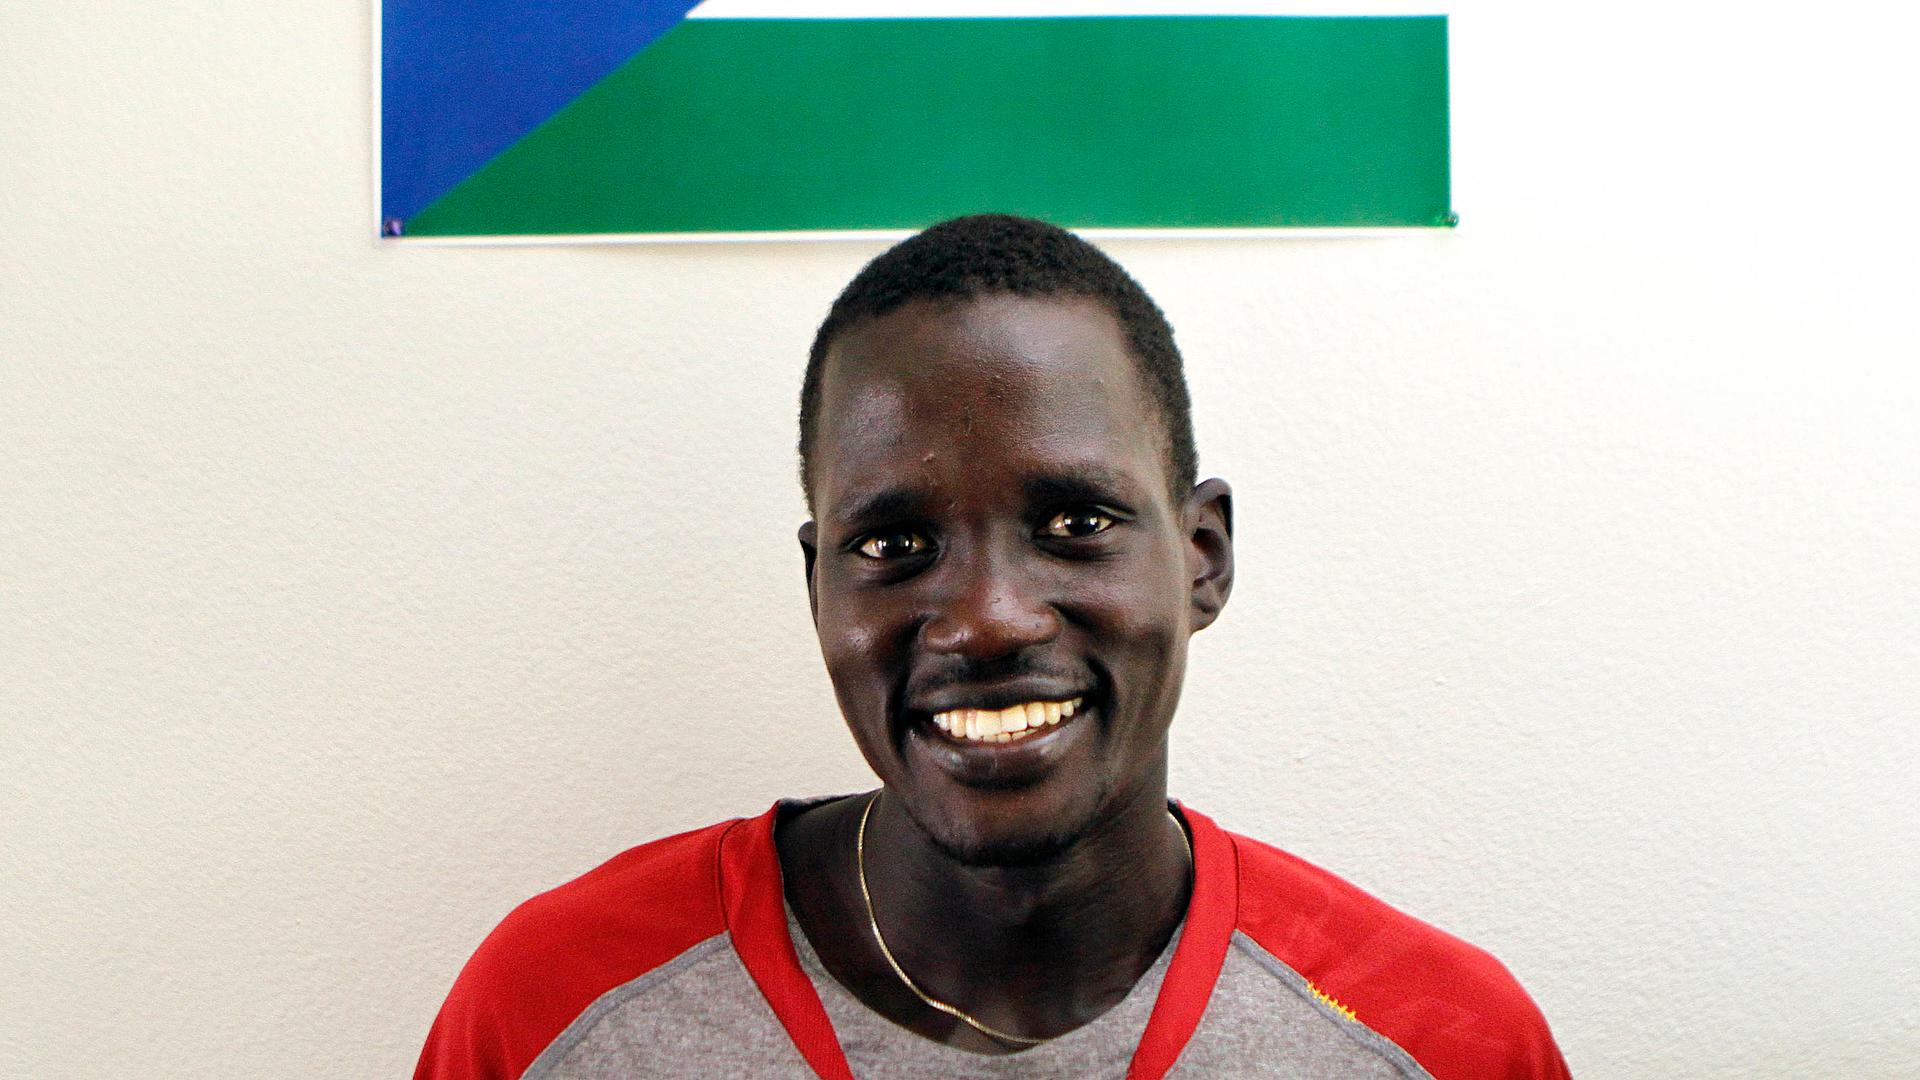 Guor Marial, 28, smiles in his apartment under a South Sudan flag in Flagstaff, Arizona July 21, 2012. The marathon runner born in what is now South Sudan ran under the Olympic flag in London.